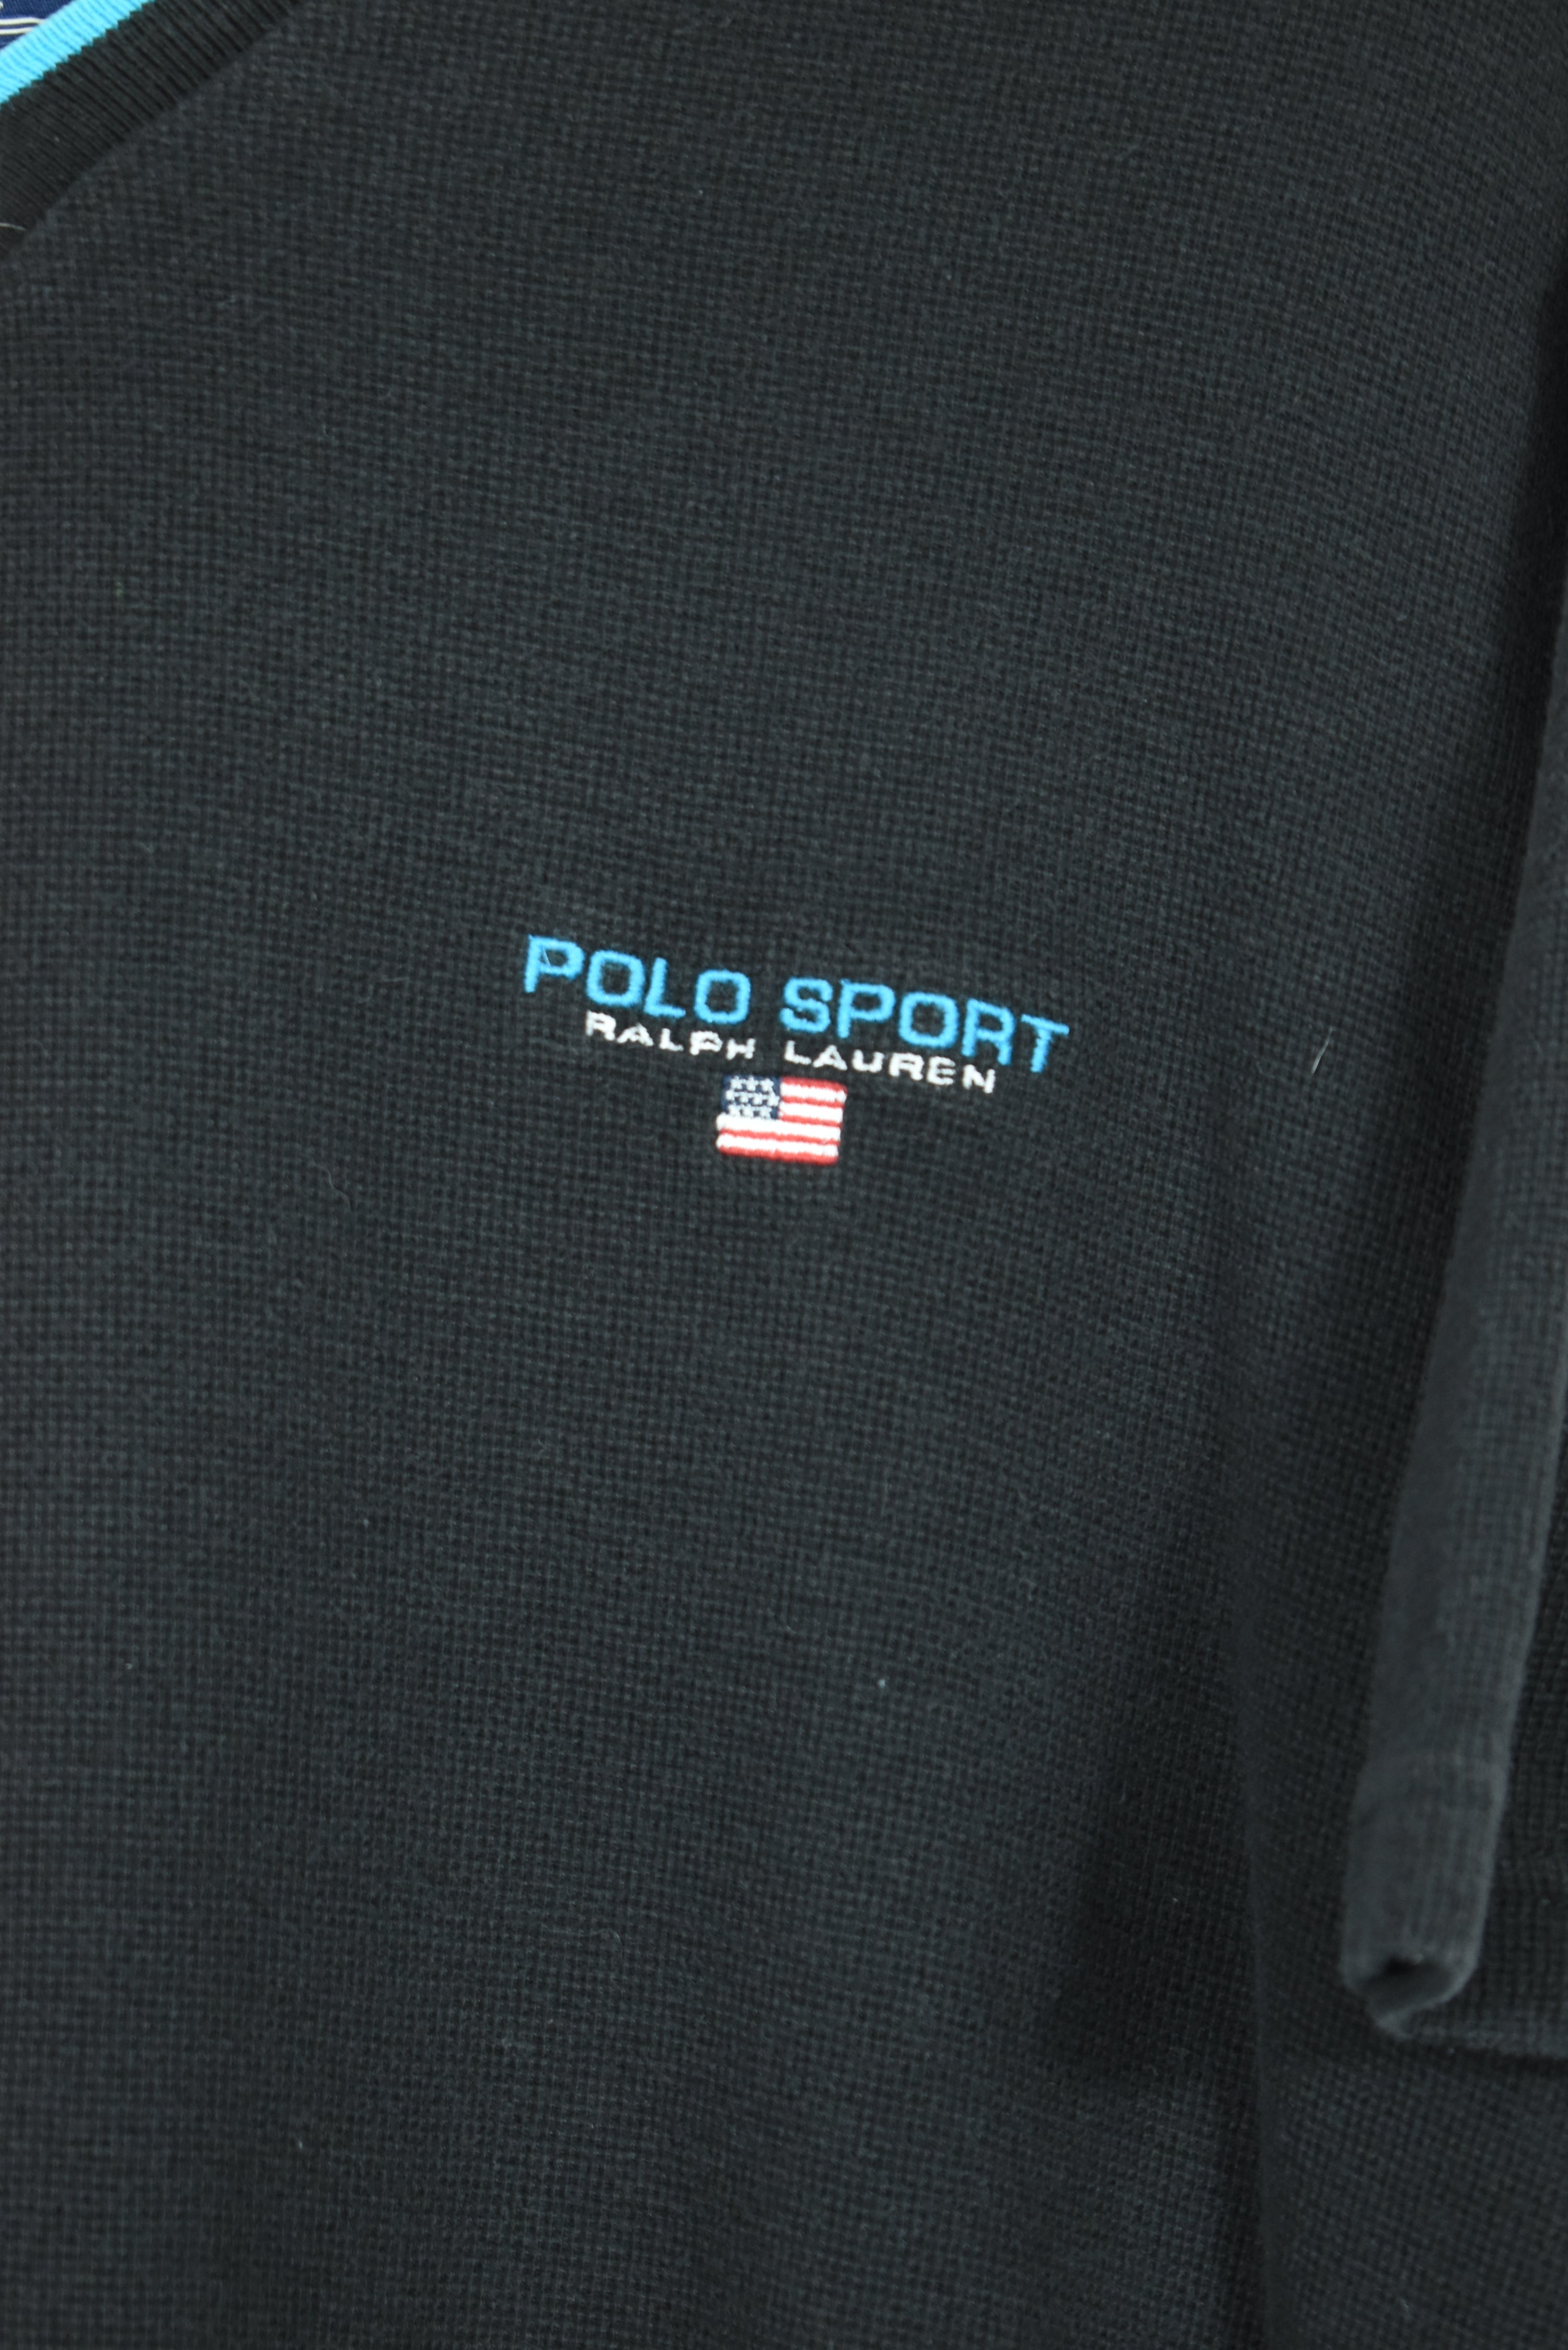 VINTAGE POLO SPORT EMBROIDERY T SHIRT LARGE